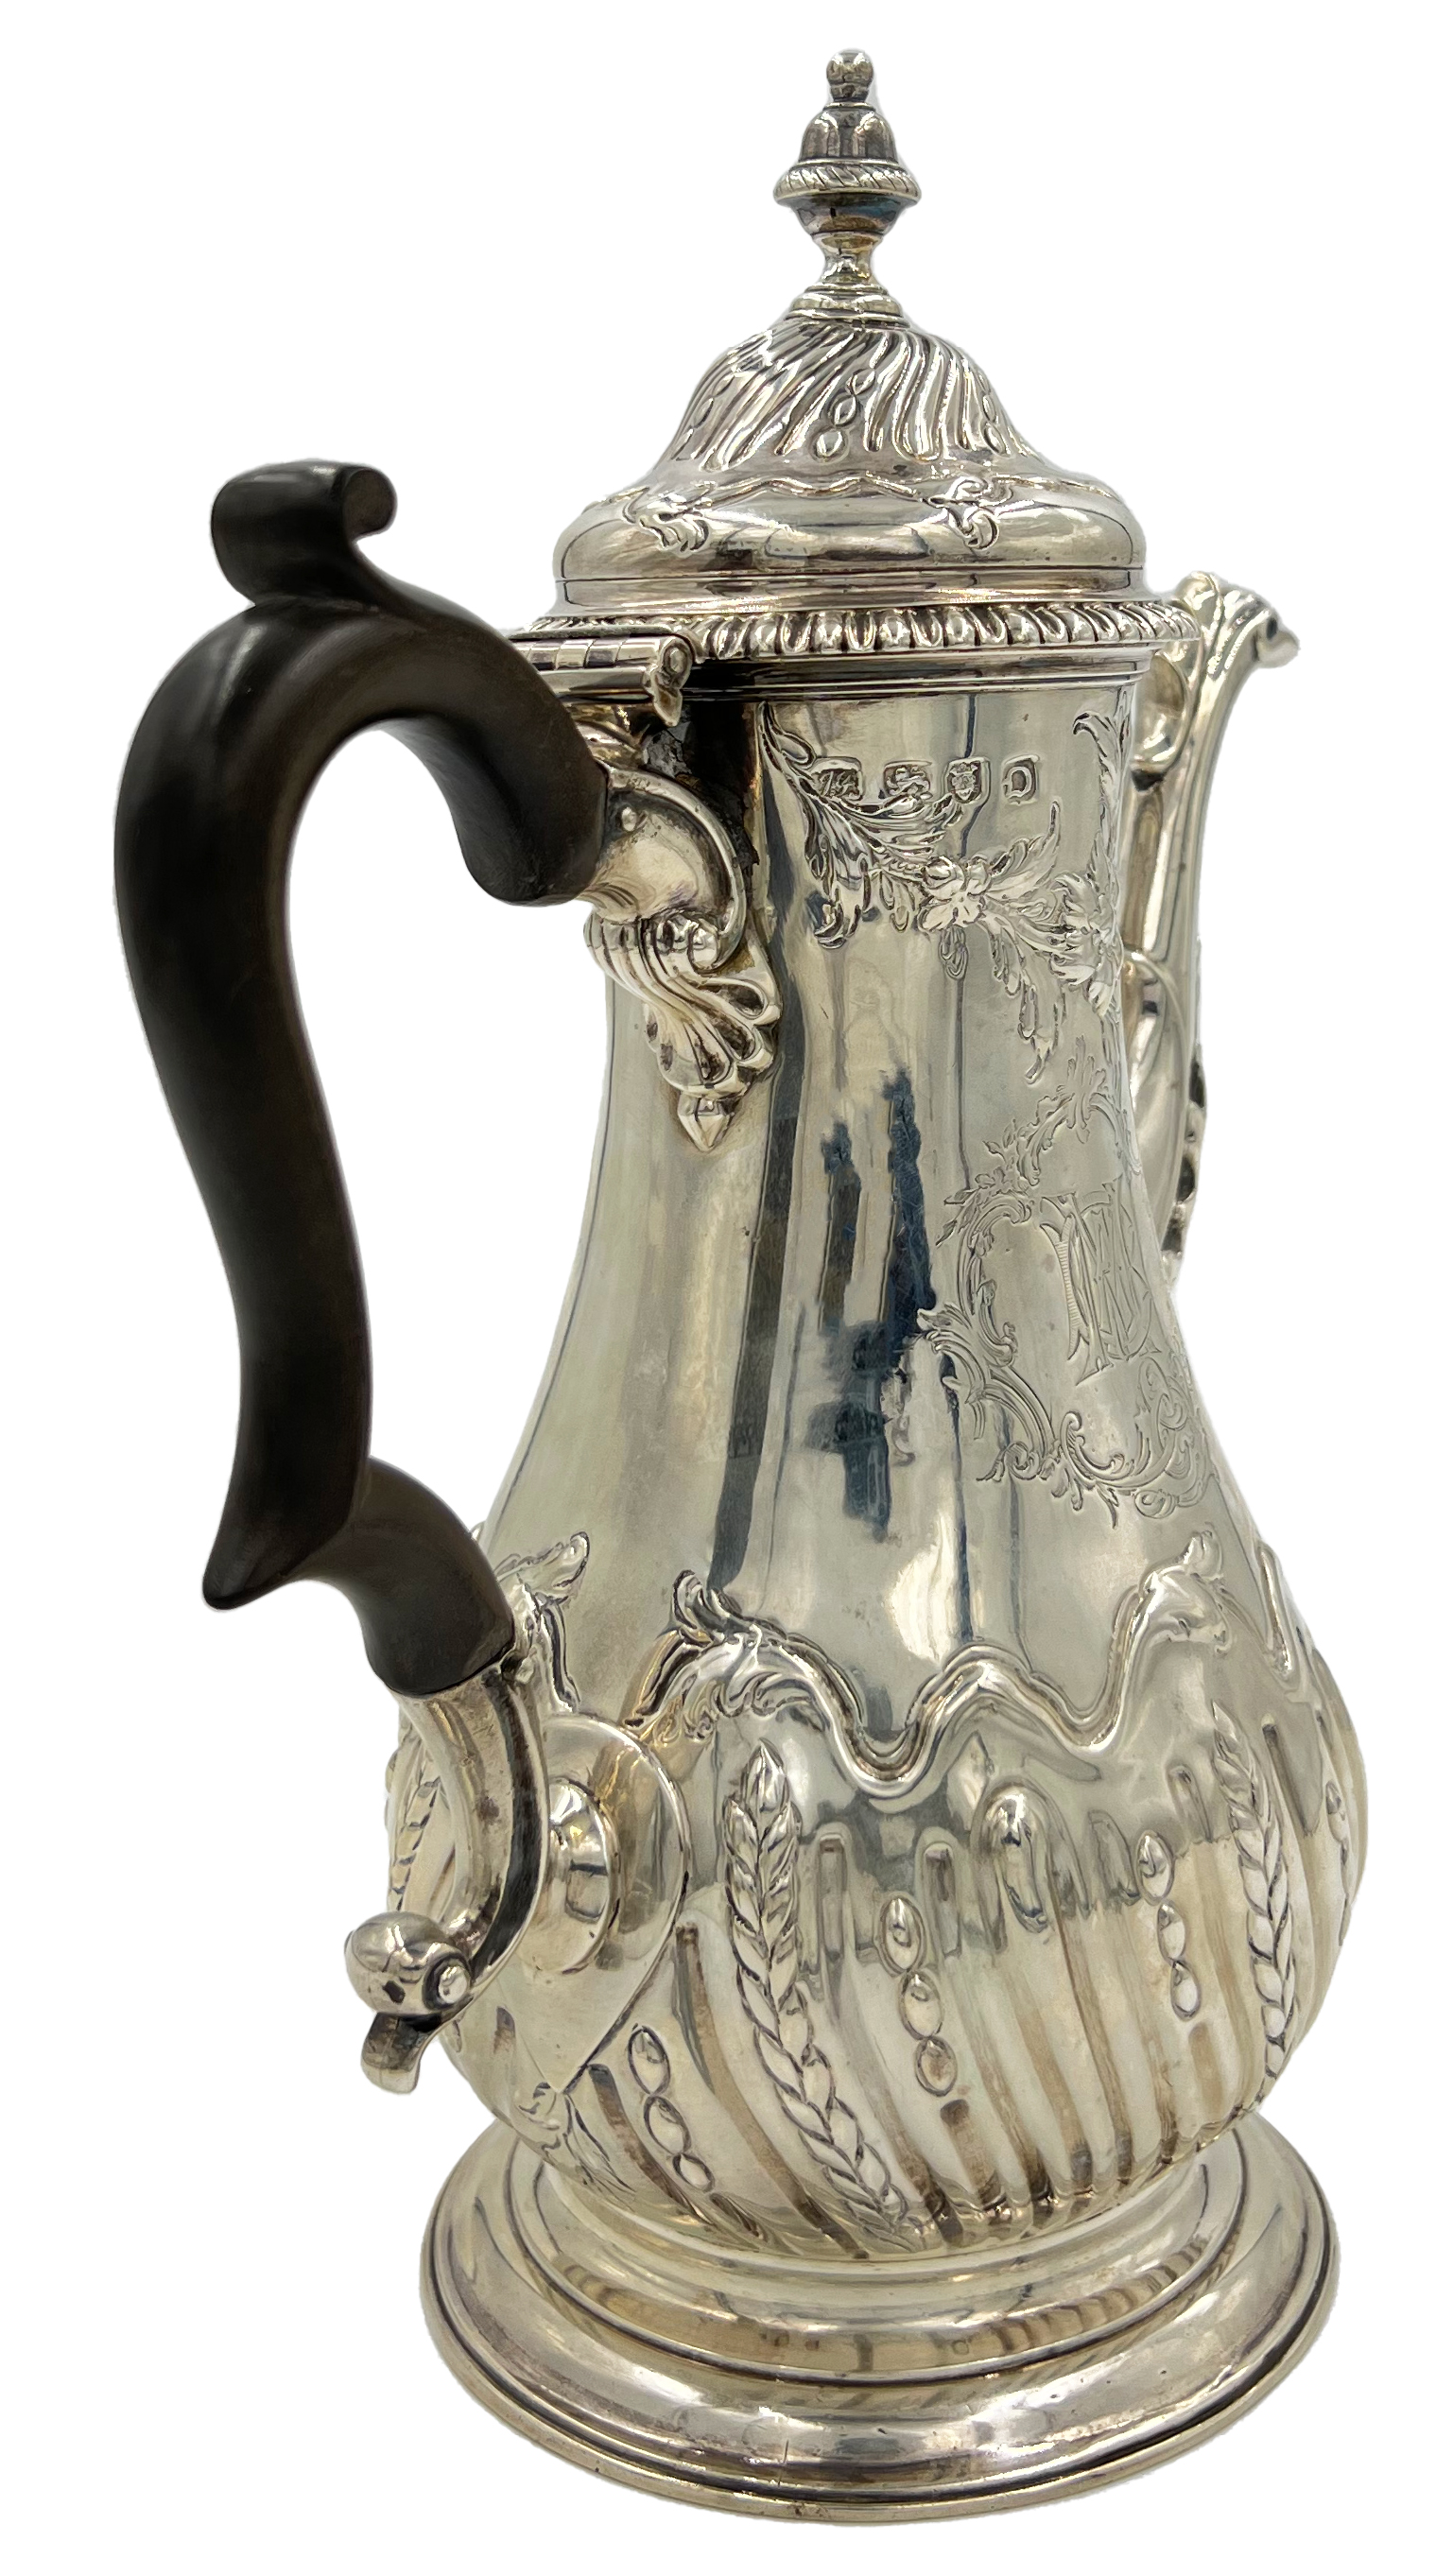 A FINE QUALITY GEORGIAN SILVER COFFEE POT WITH EMBOSSED DECORATION, LONDON, JOHN PAYNE, 1759 - Image 4 of 5